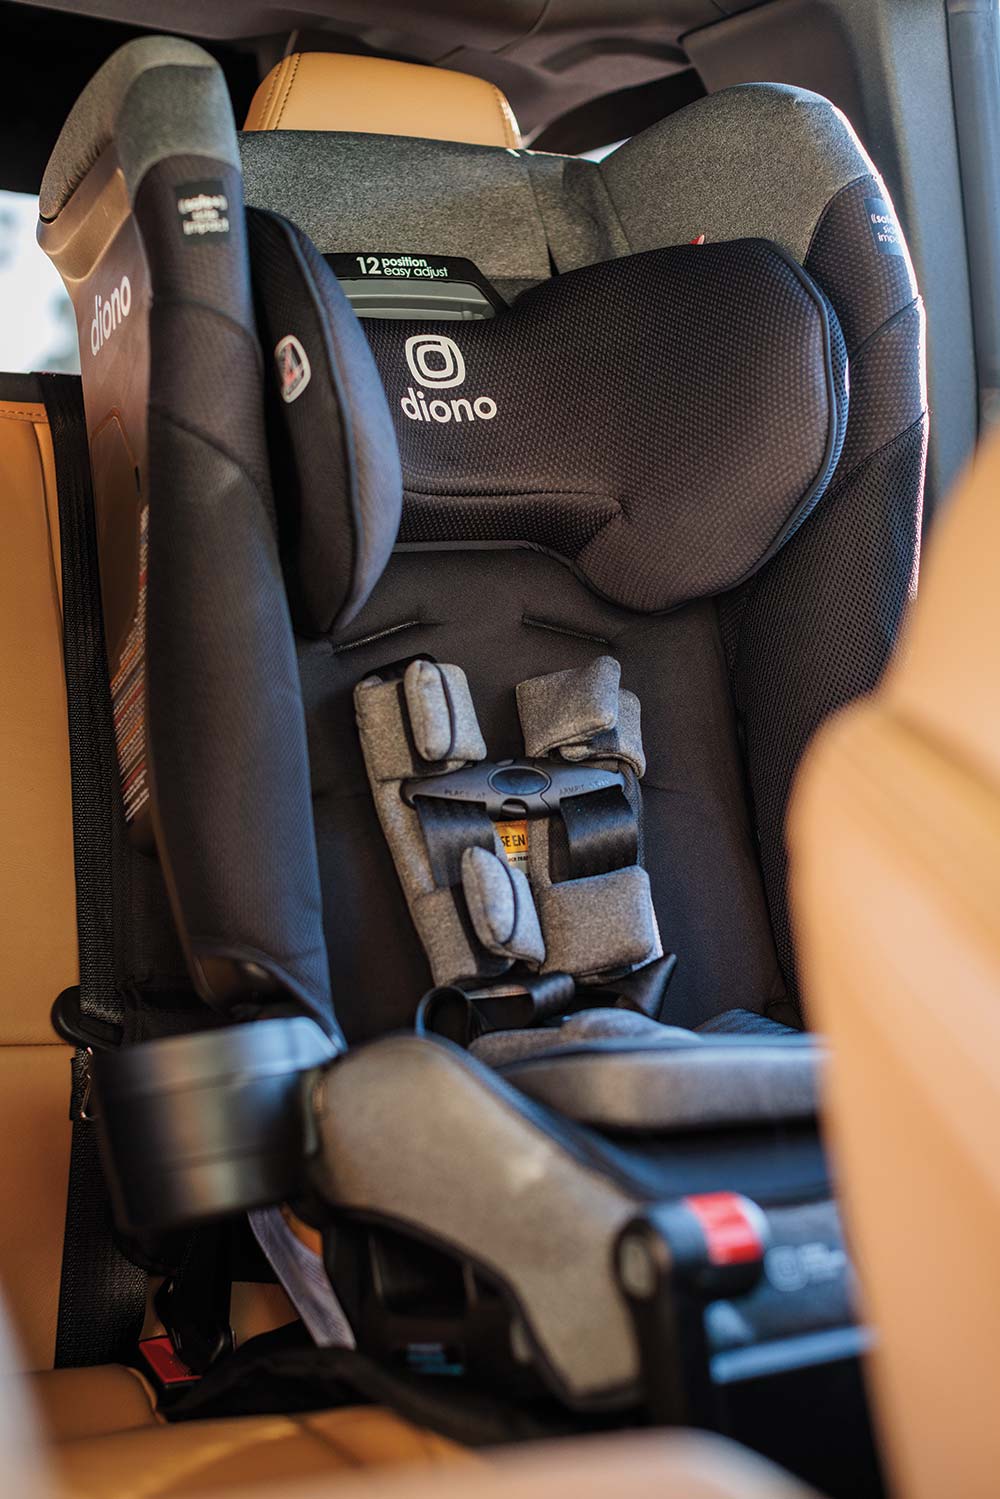 Diono car seat with straps family gear